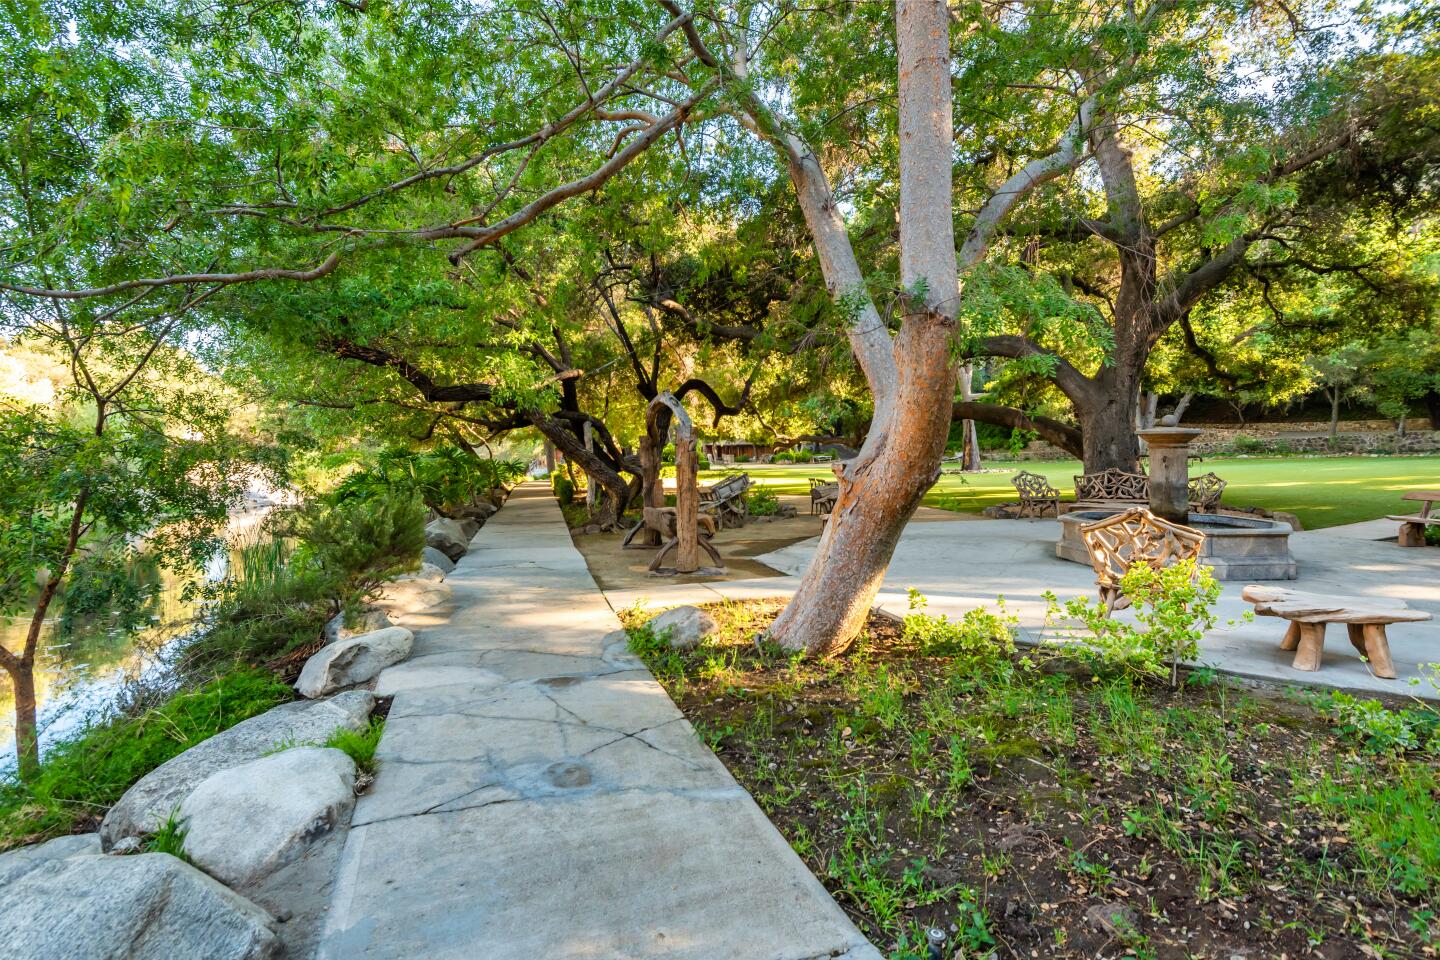 A stone path is shaded by large oak trees.